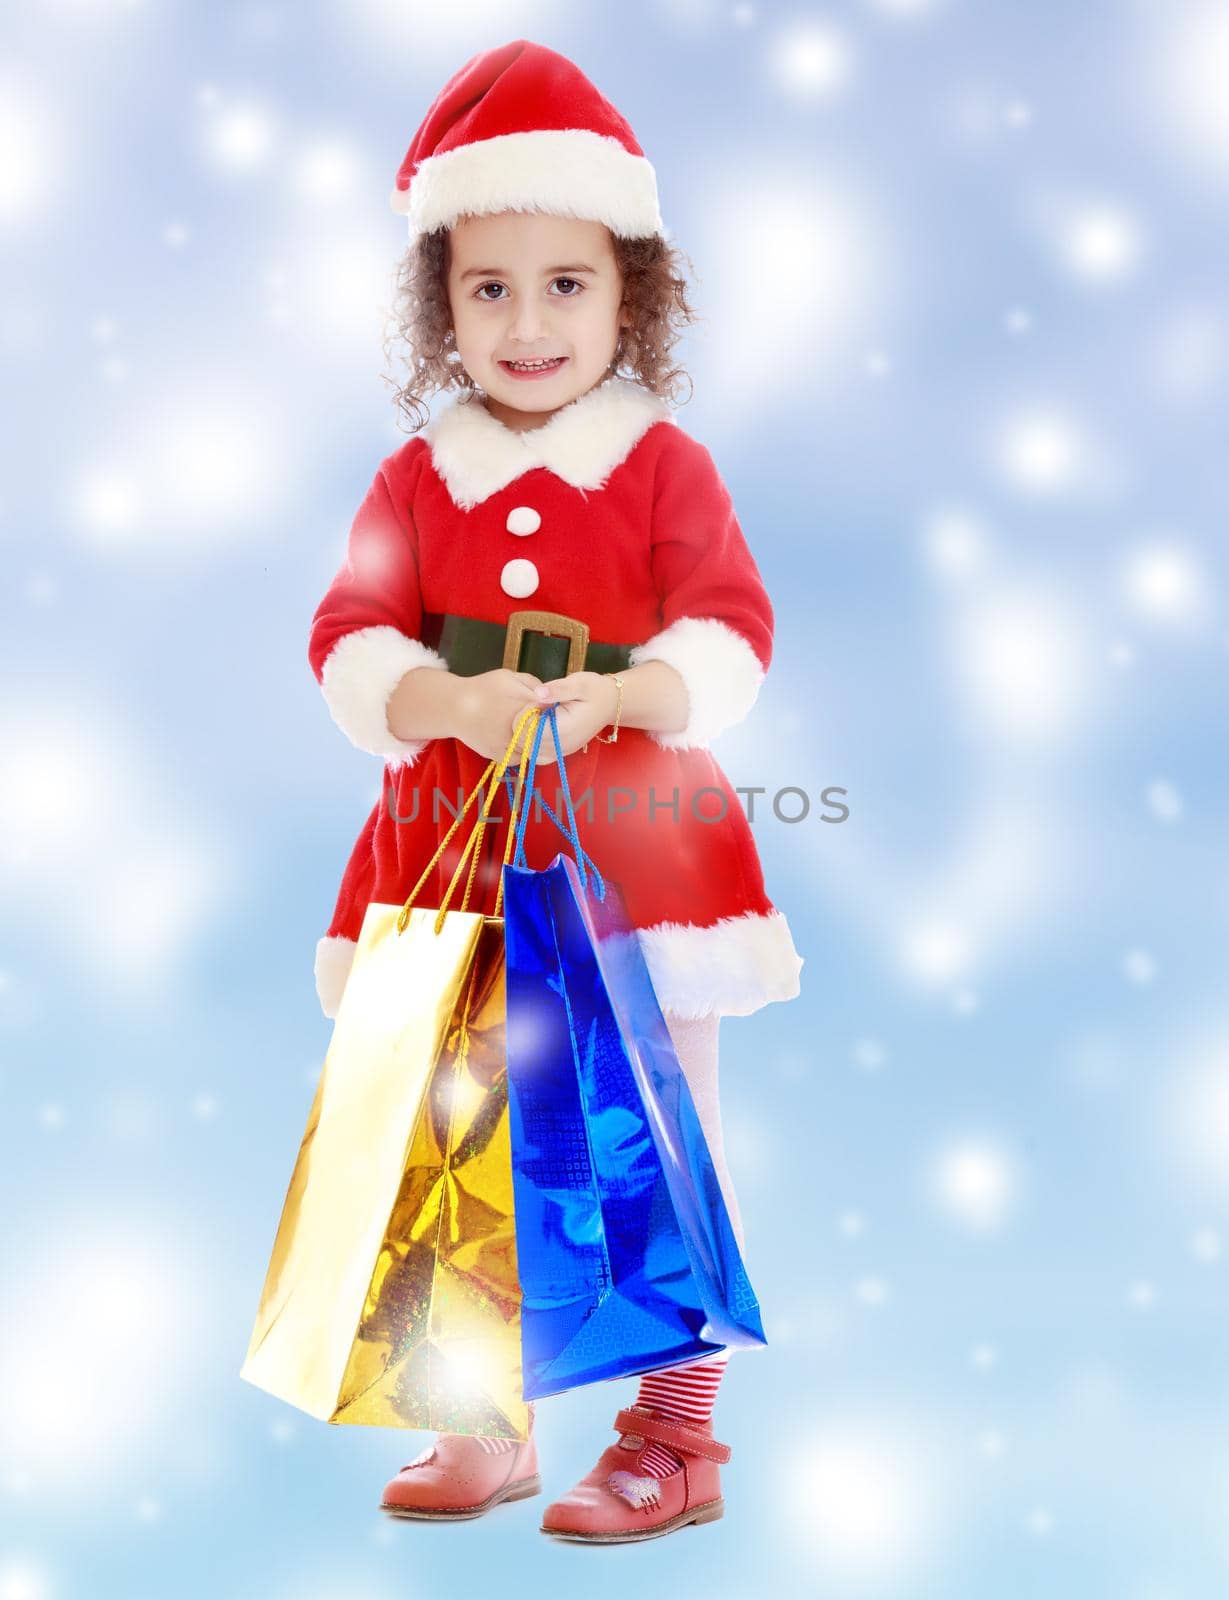 Adorable little curly-haired girl in a coat and hat of Santa Claus,holding colorful shopping bags.Blue winter background with white snowflakes.